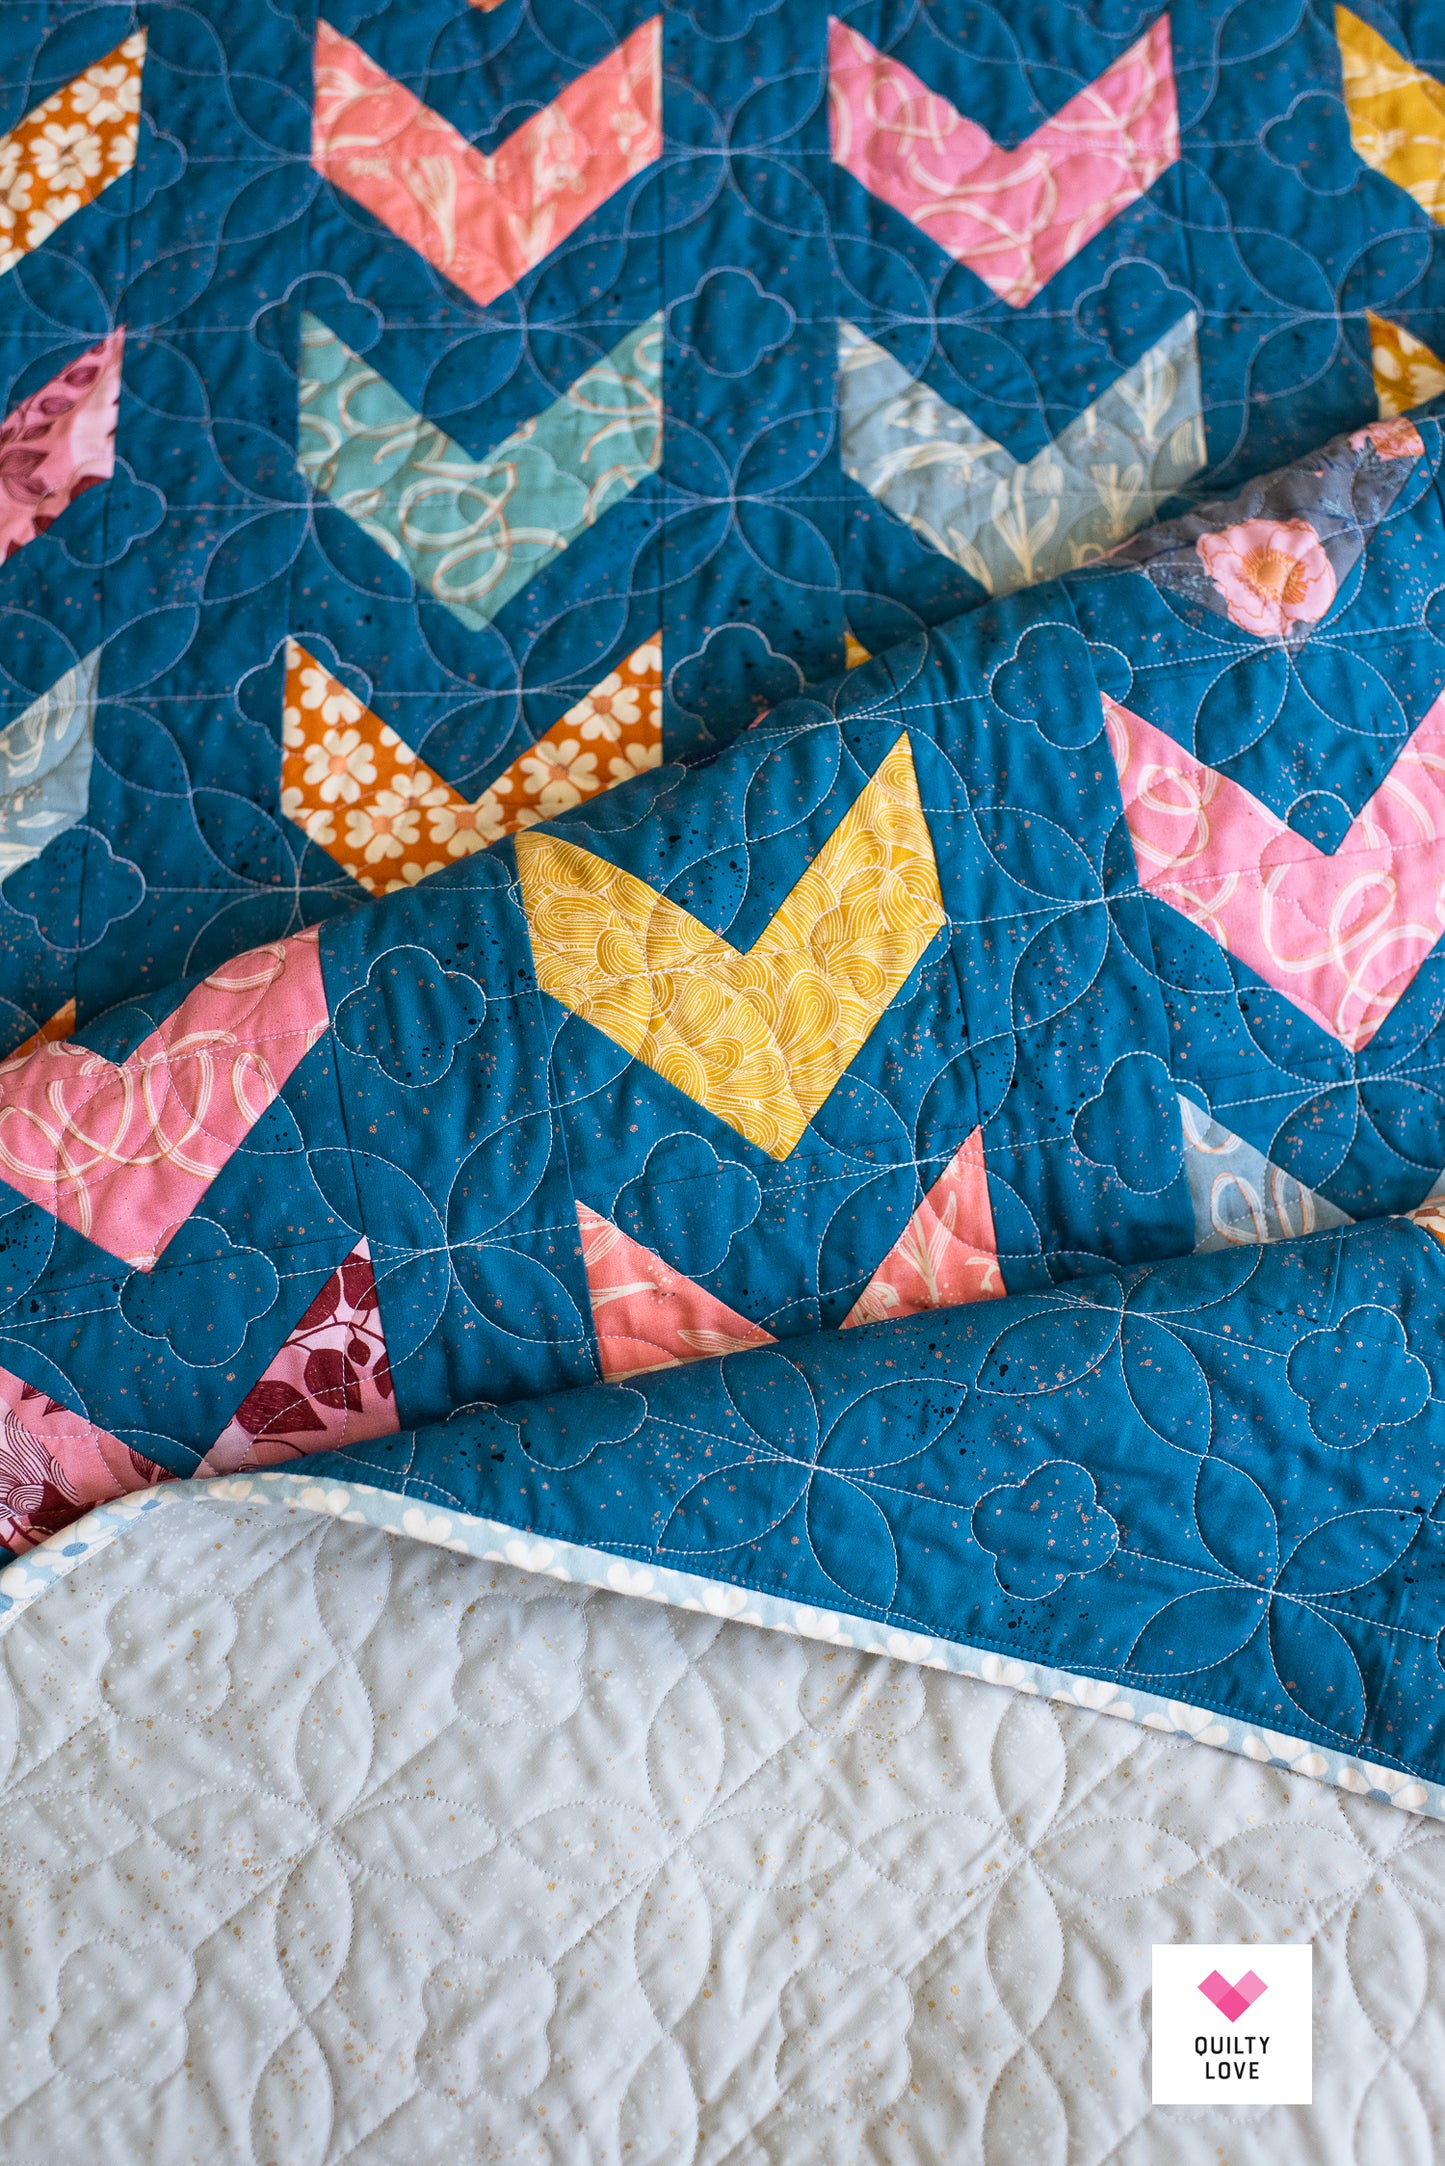 Scrappy Arrows PDF Quilt Pattern-Automatic Download